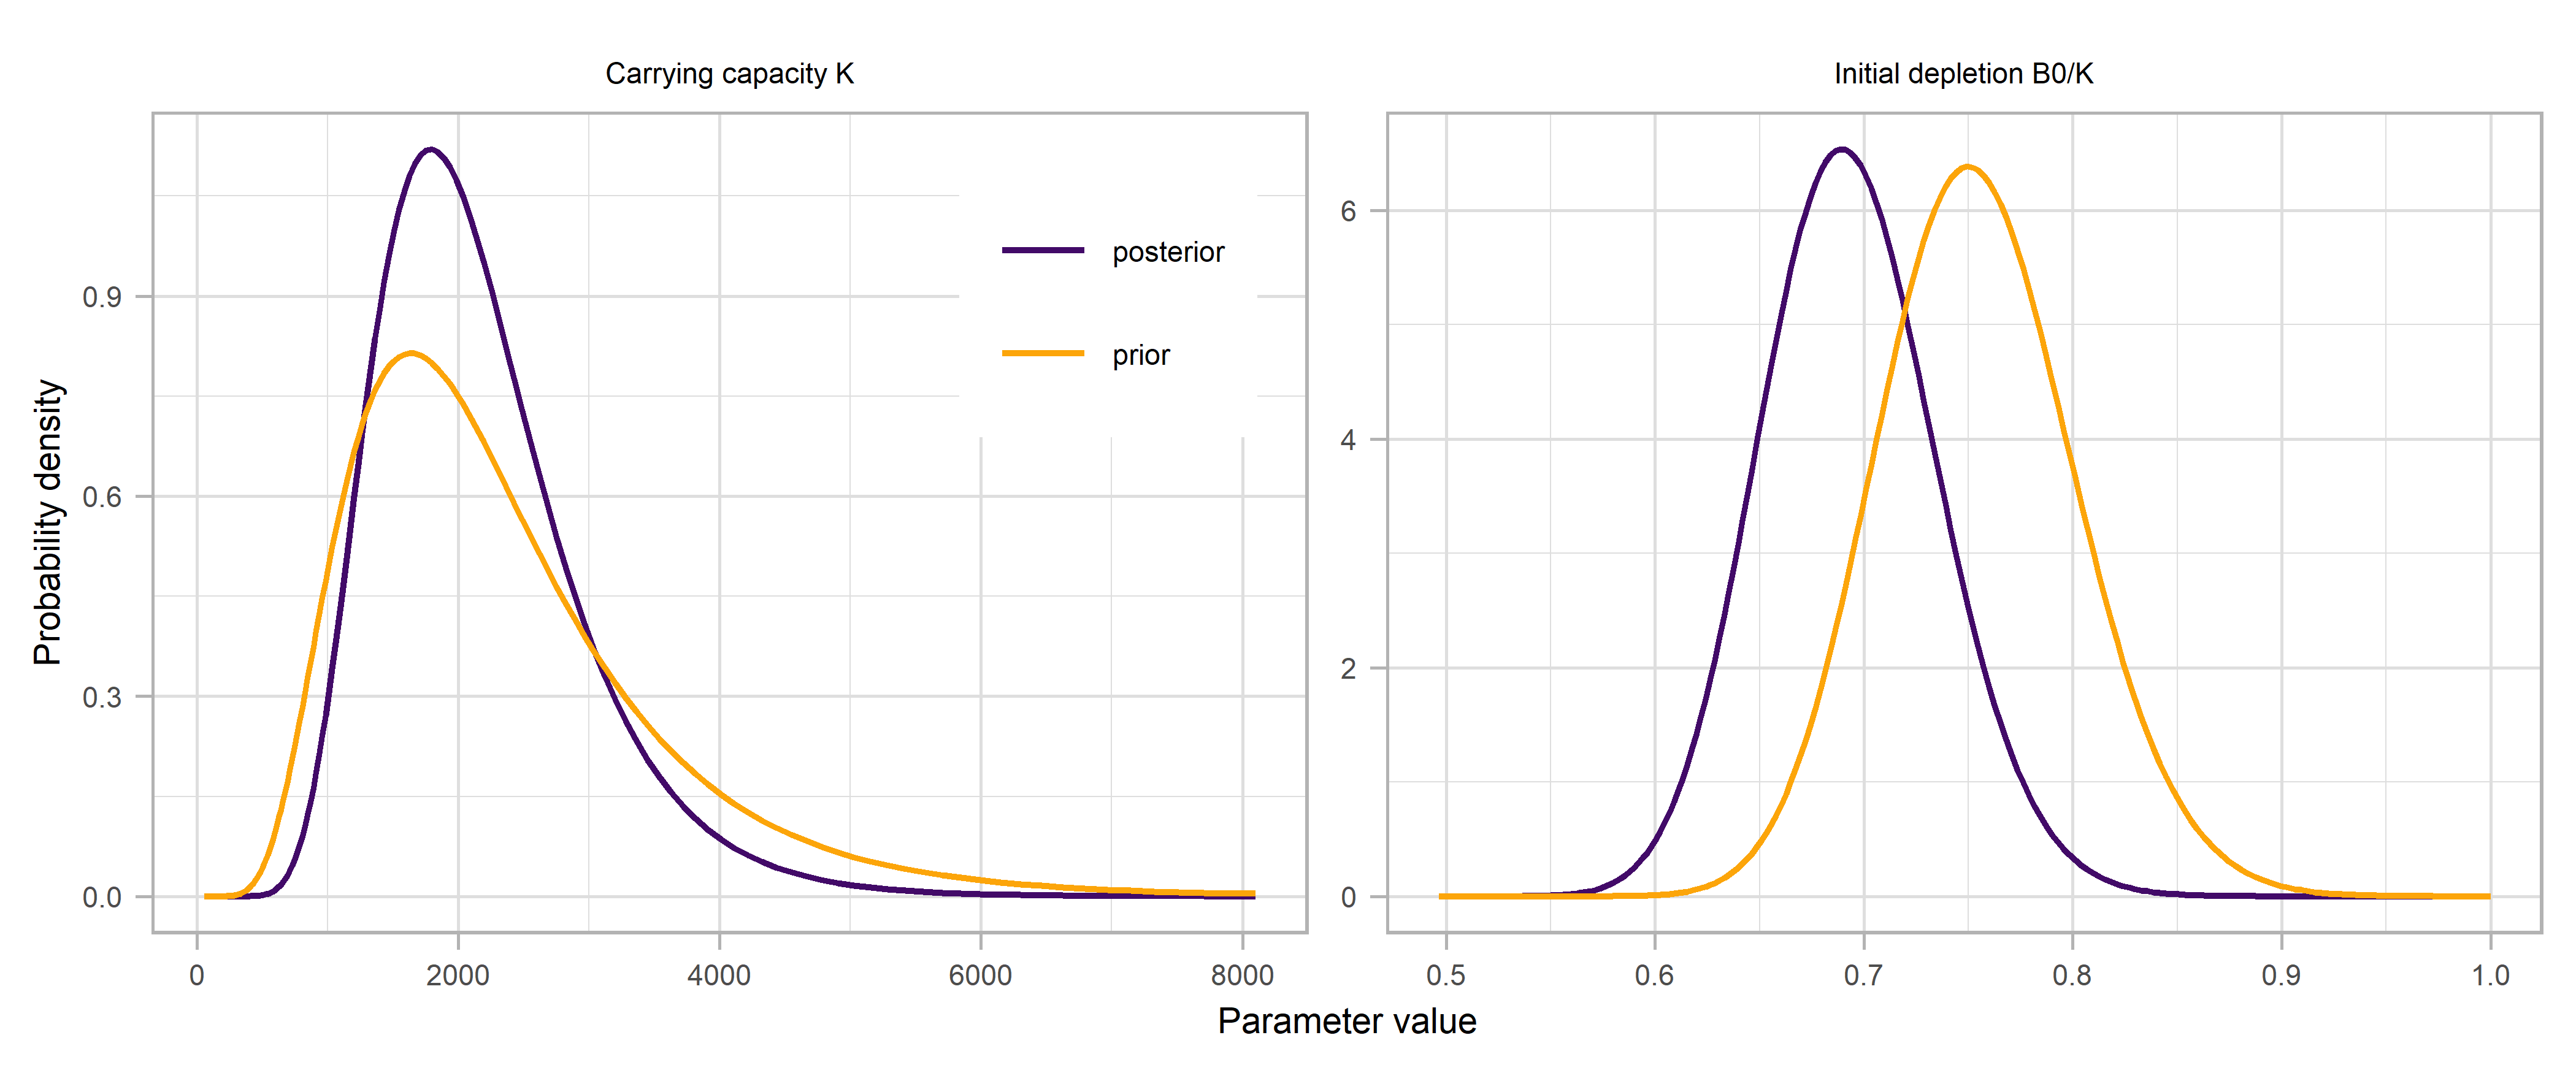 Figure 7: Prior and posterior distribution for carrying capacity, K, and initial depletion B0/K.